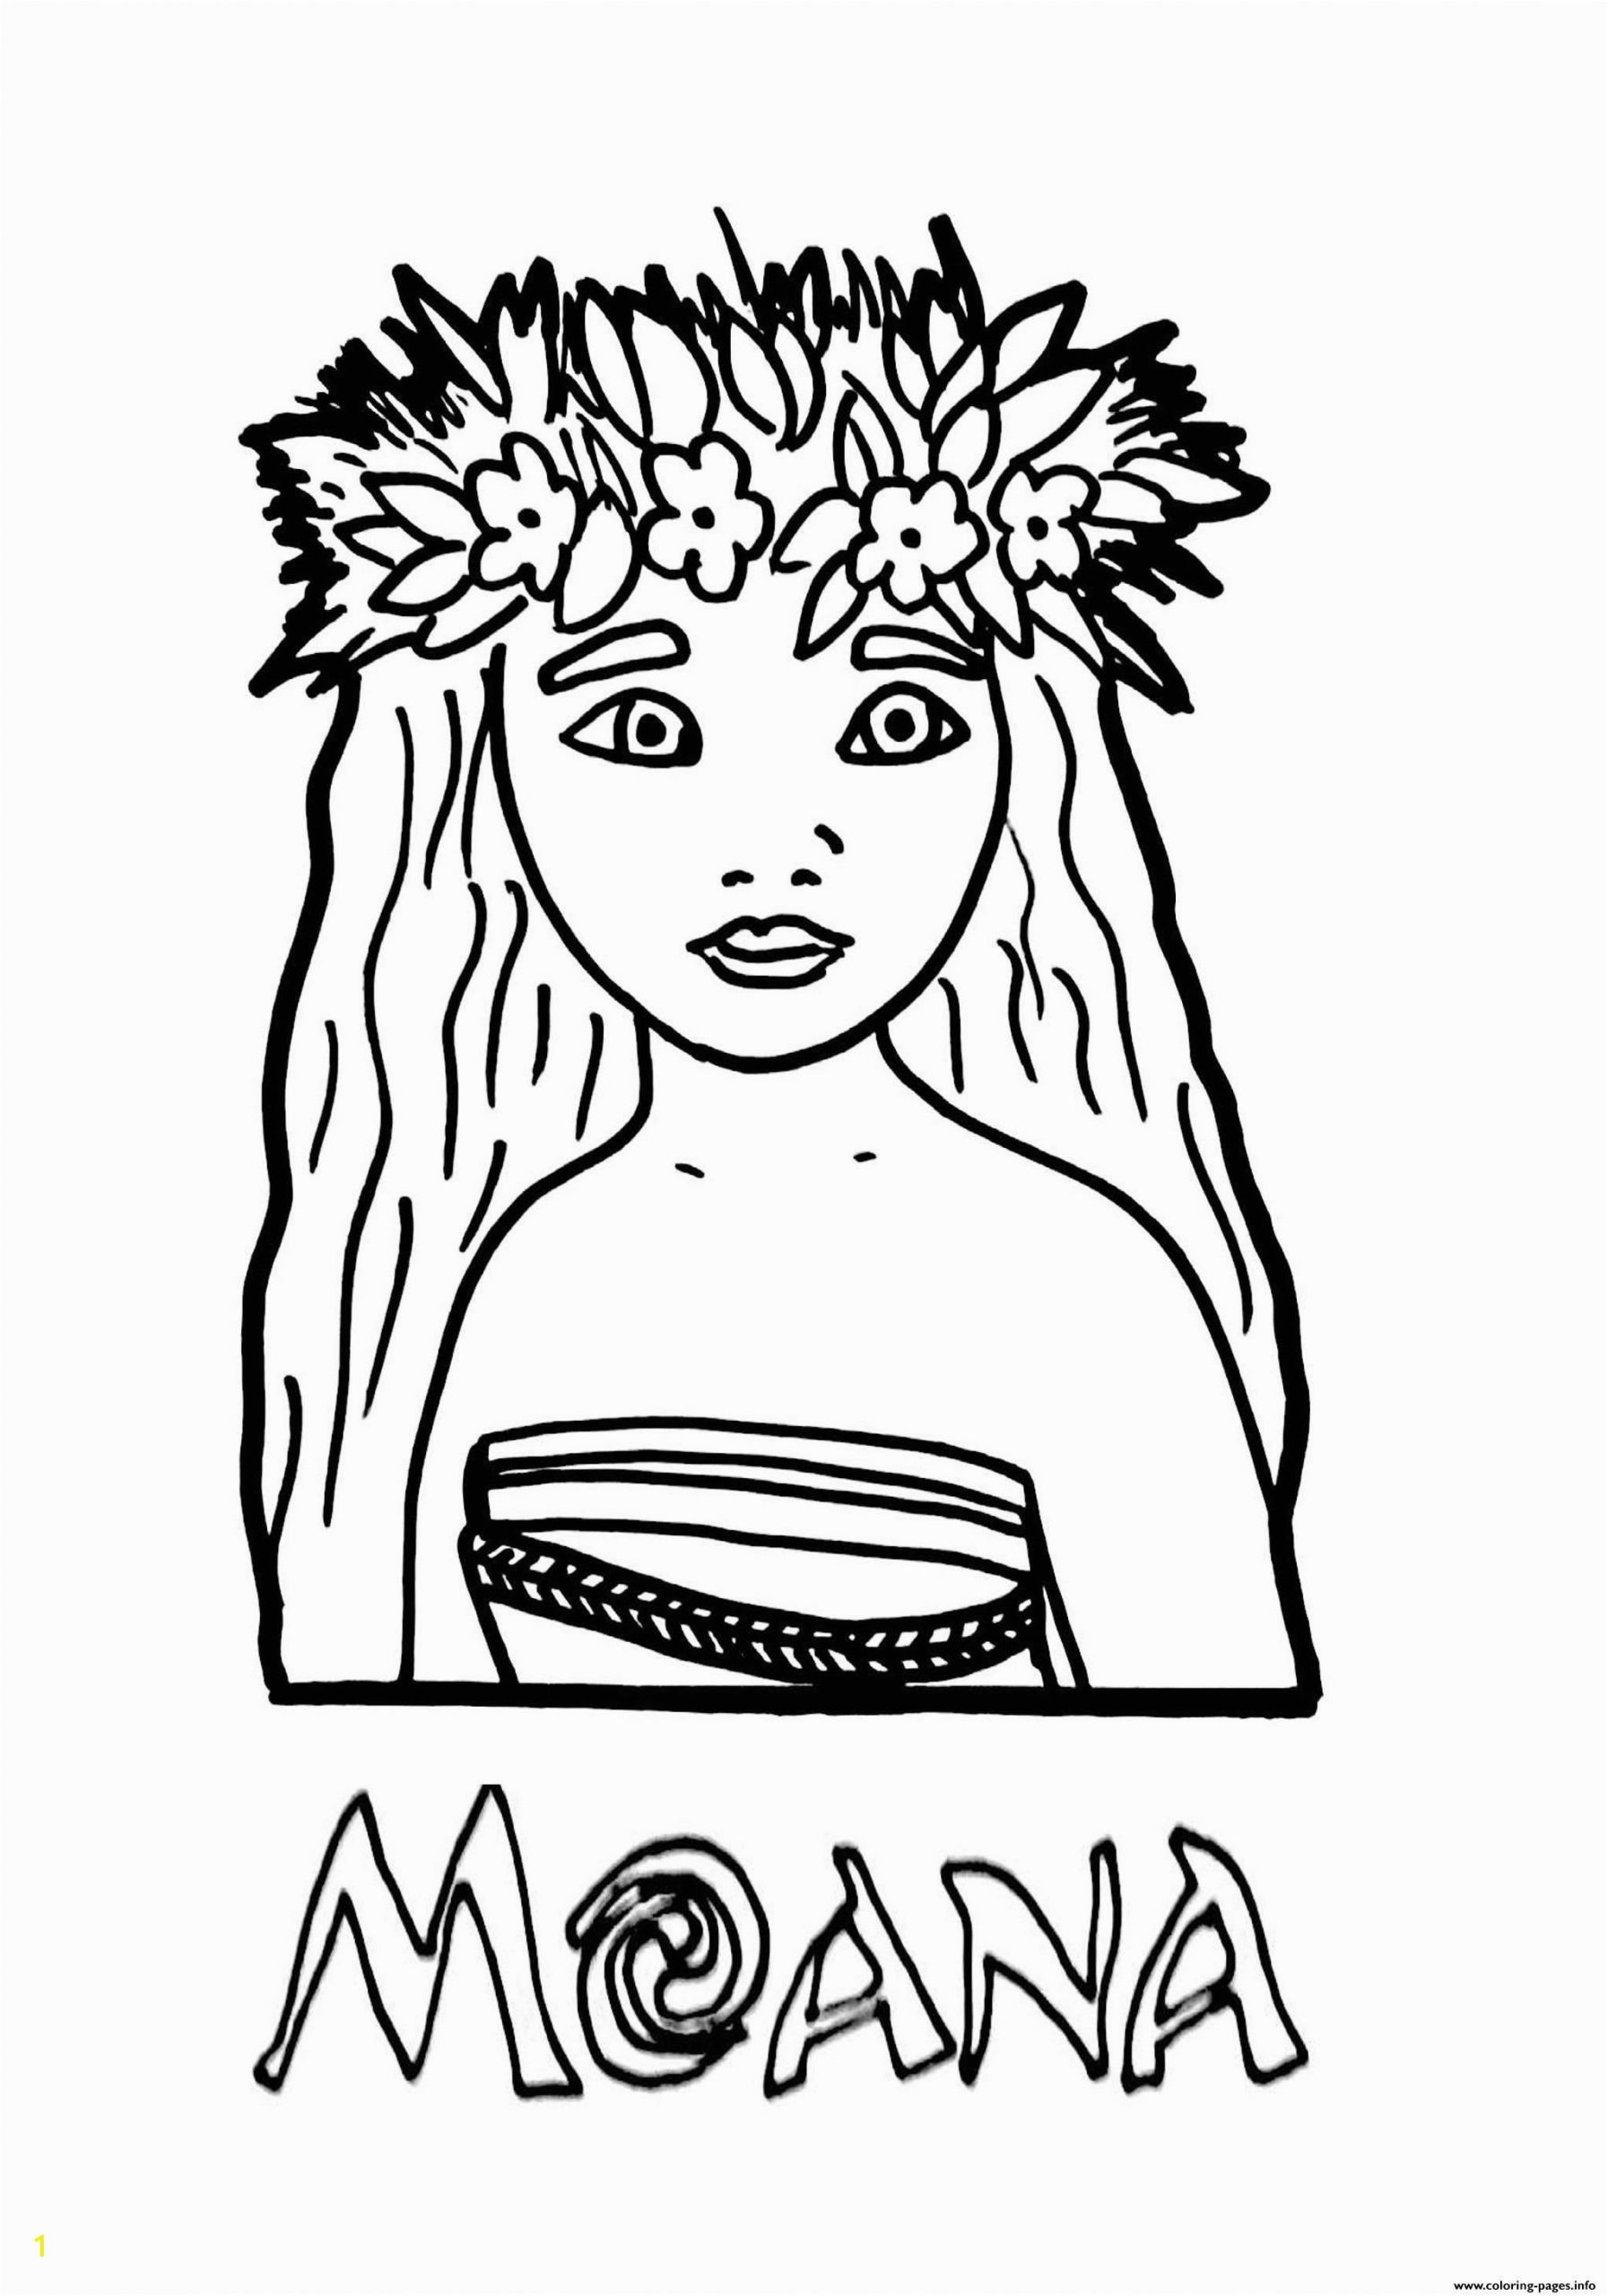 Free Printable Moana Coloring Pages Coloring Pagesfo Moana Princess Printable Coloring Pages